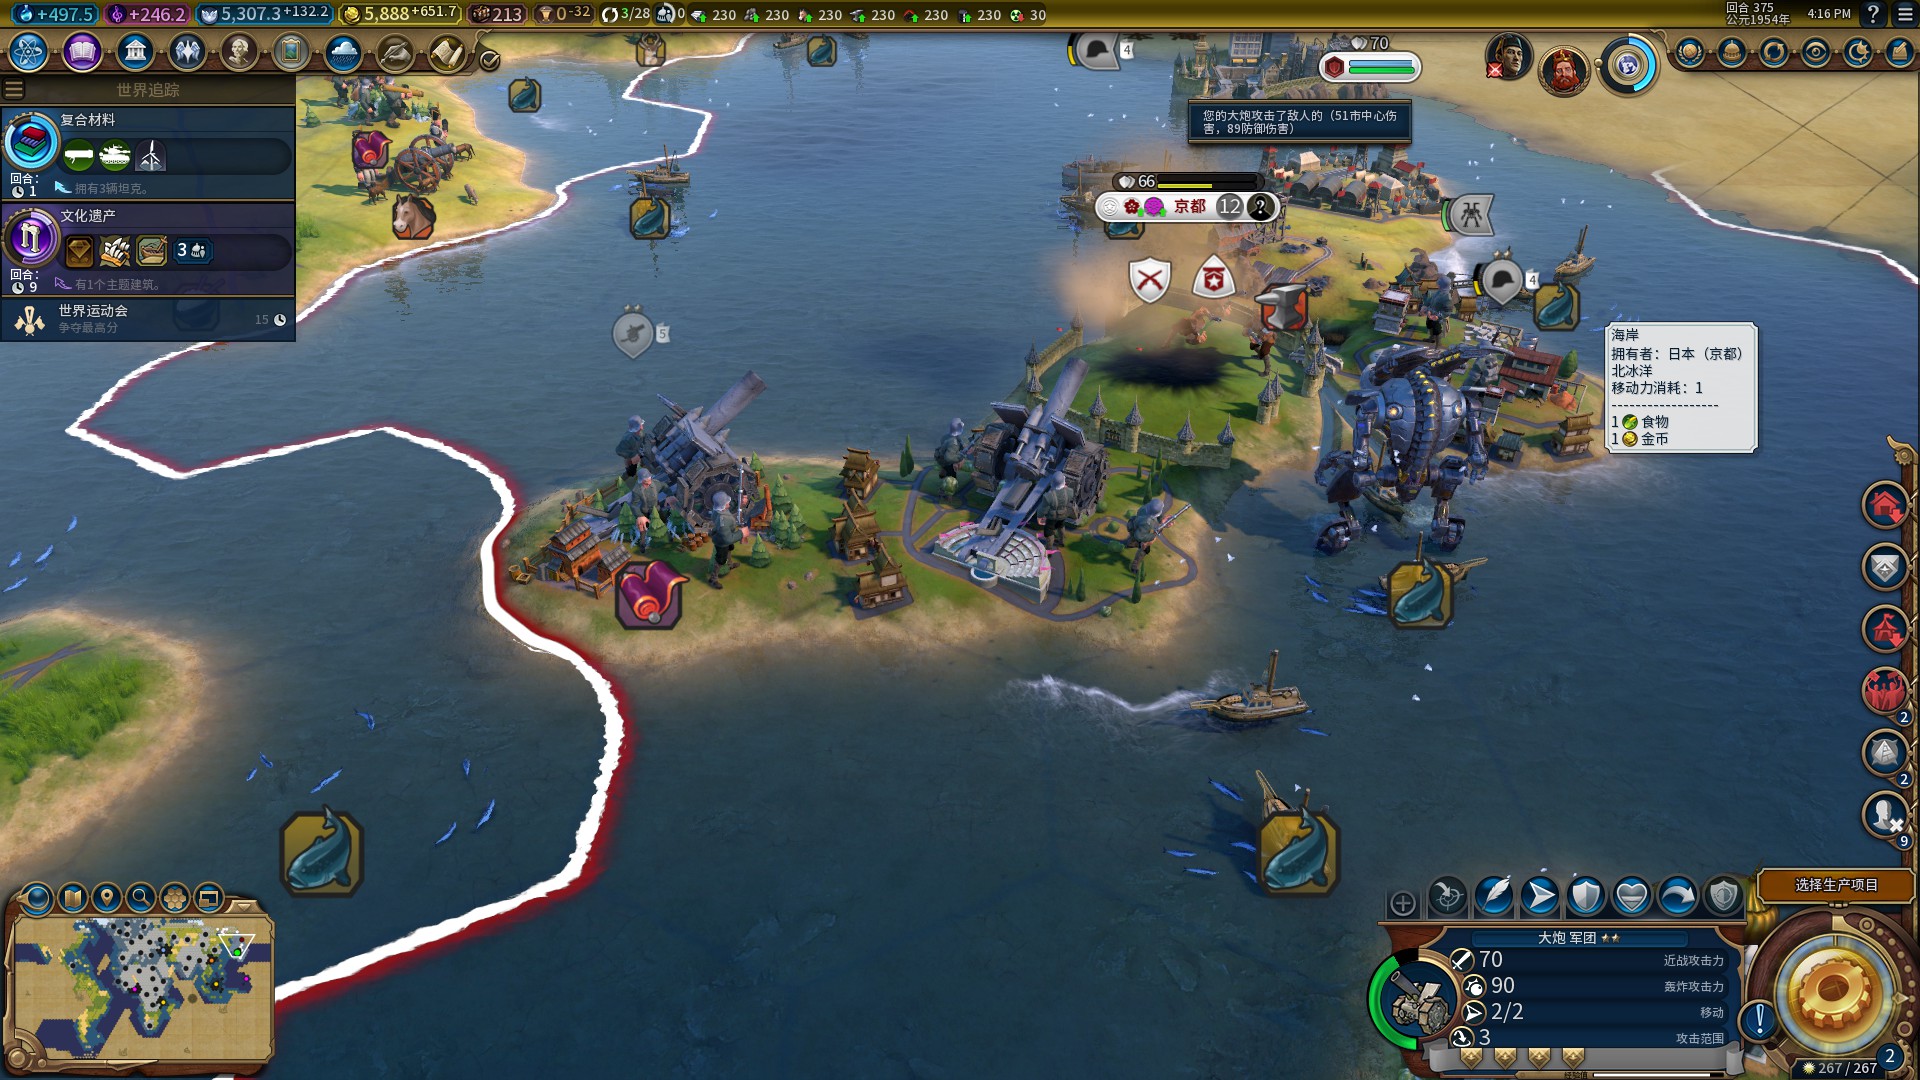 how to install civ 5 mods without steam